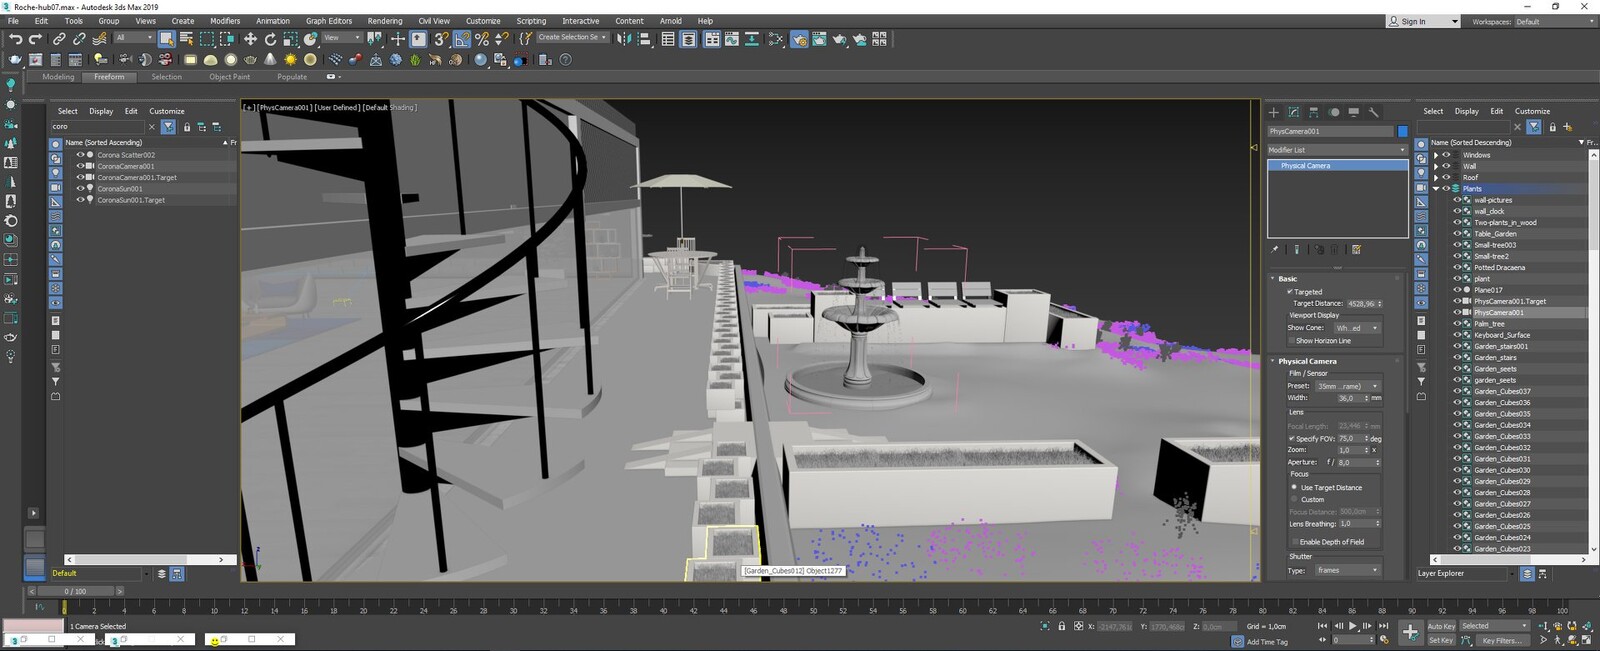 The model insid 3ds max